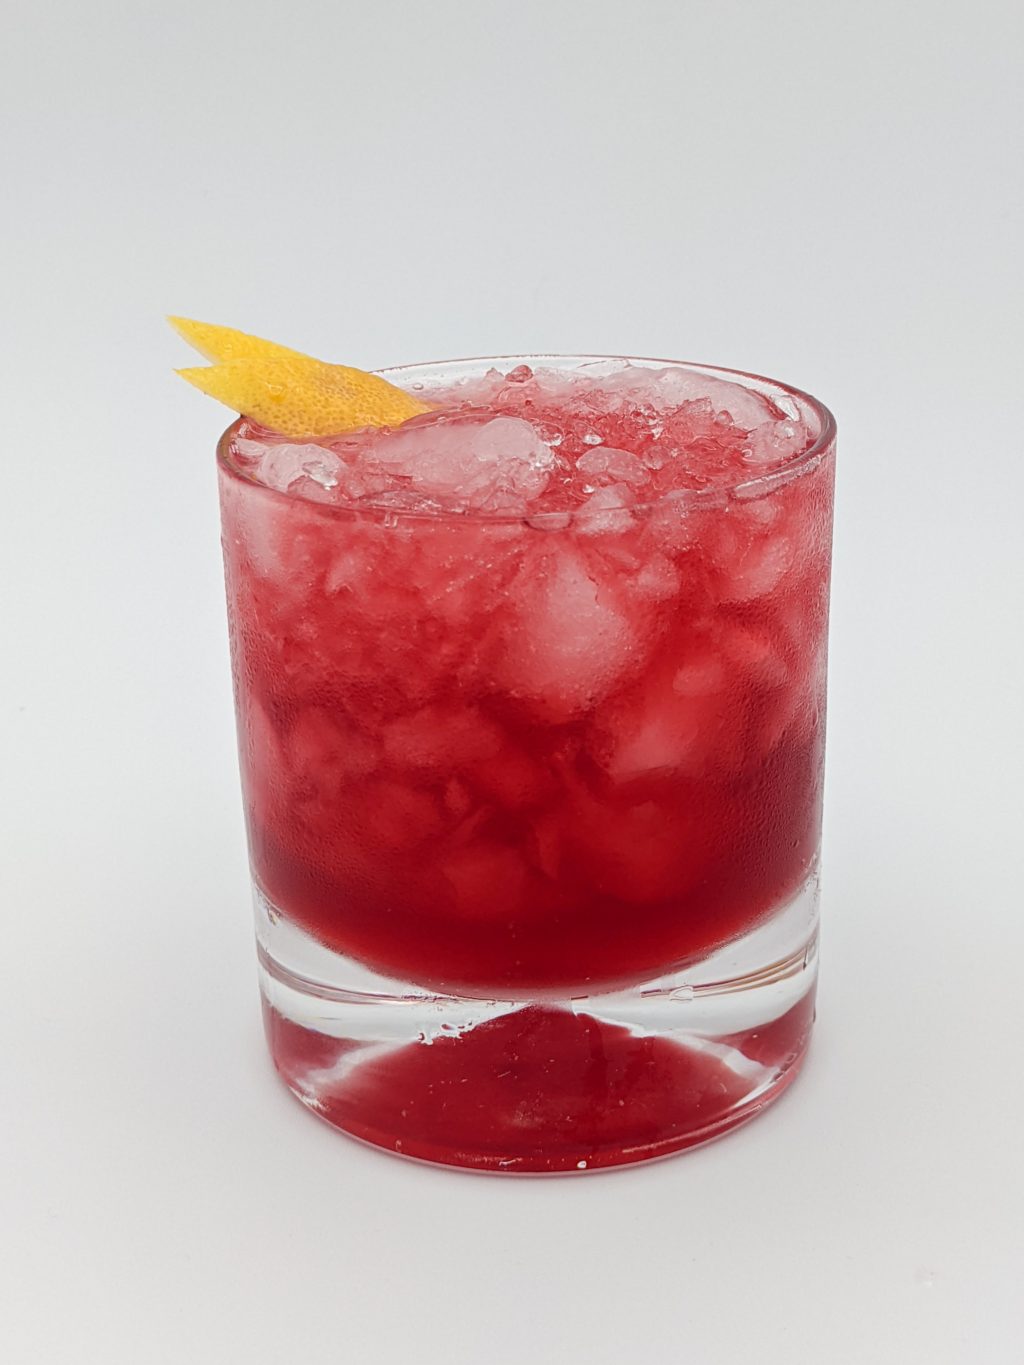 Dark red liquid in a rocks glass filled with crush ice with a lemon peel garnish